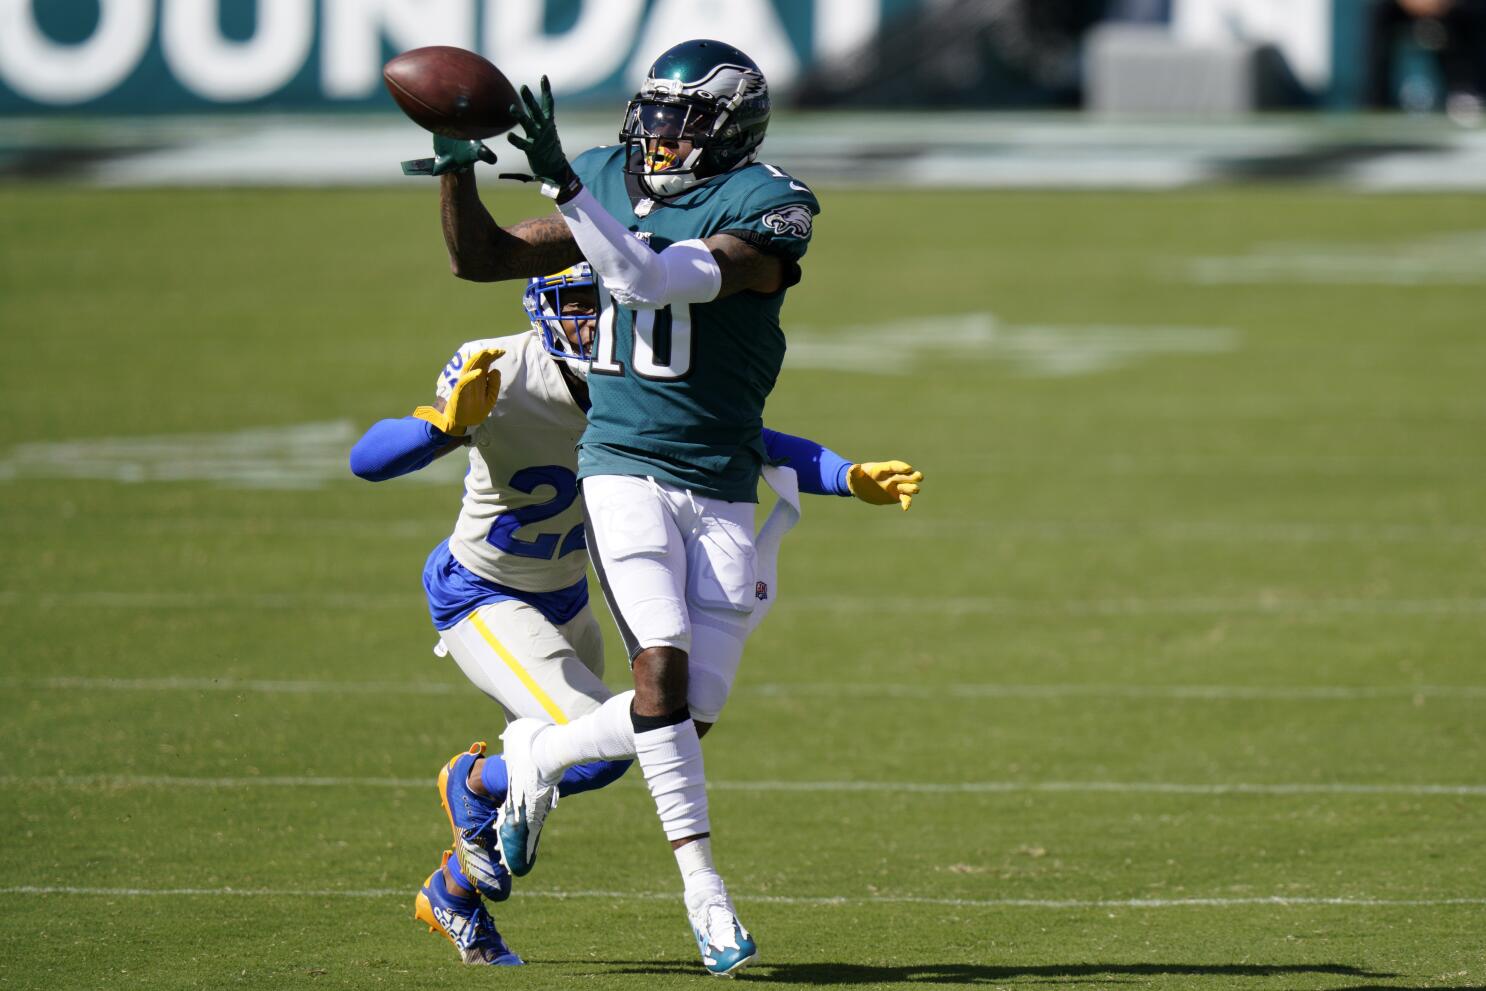 Nick Foles has hot hand again, leads Eagles to playoff berth - The